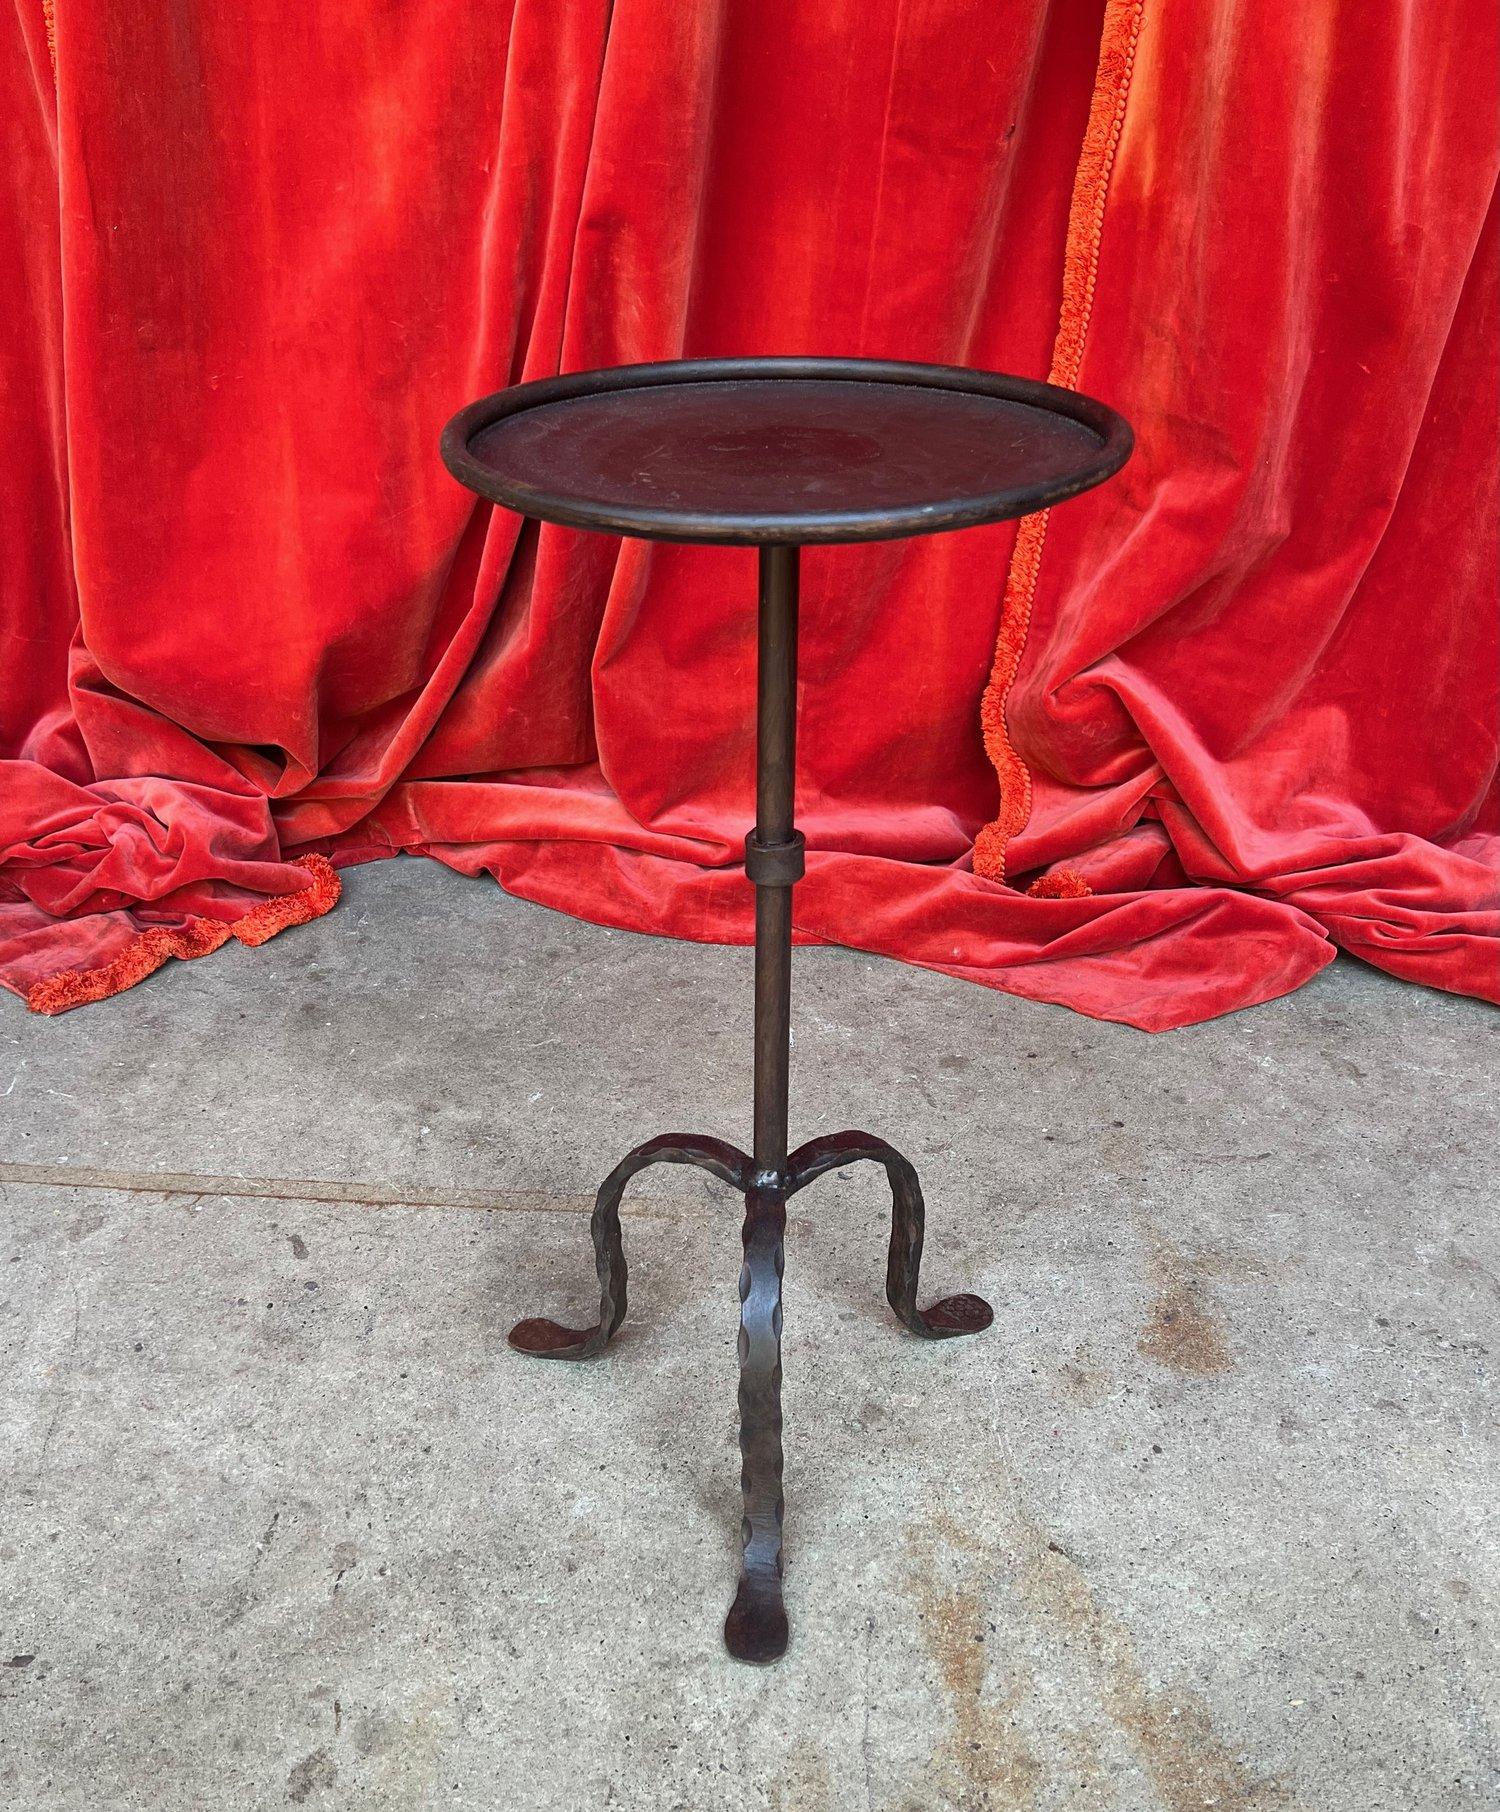 An elegant Spanish small-scale iron and metal drinks table from the 1950s, having a perfect blend of elegance and vintage appeal. Crafted with a circular central stem adorned by a decorative collar accent, this captivating table stands on a tripod